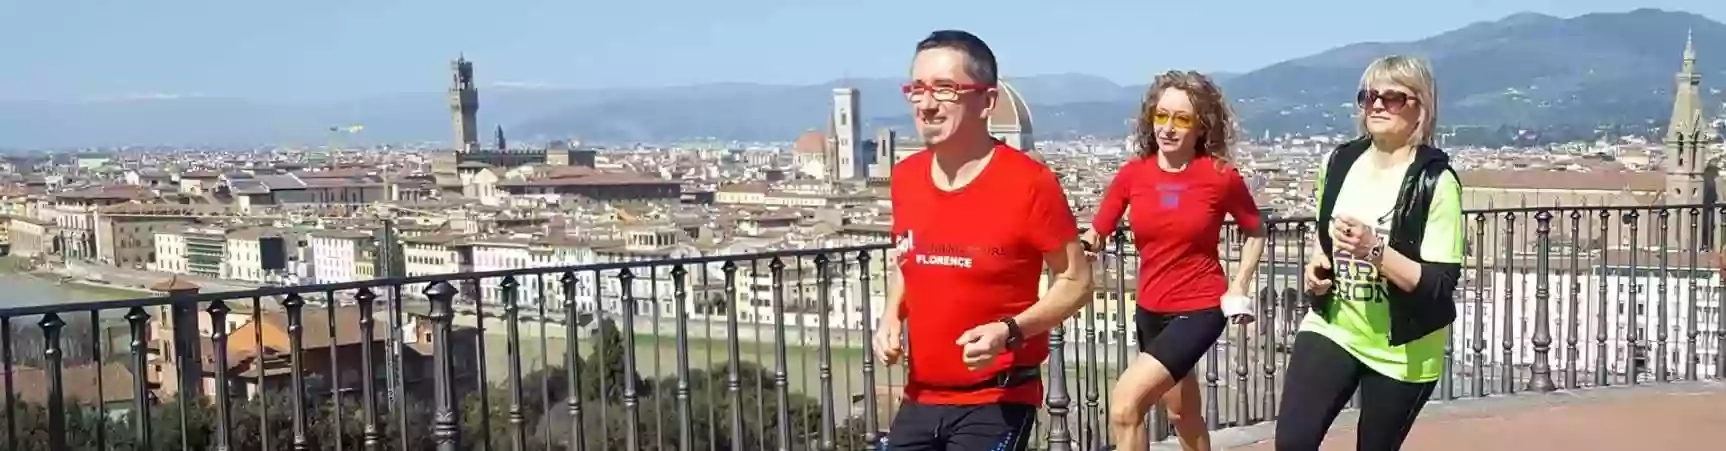 Go! Running Tours Florence